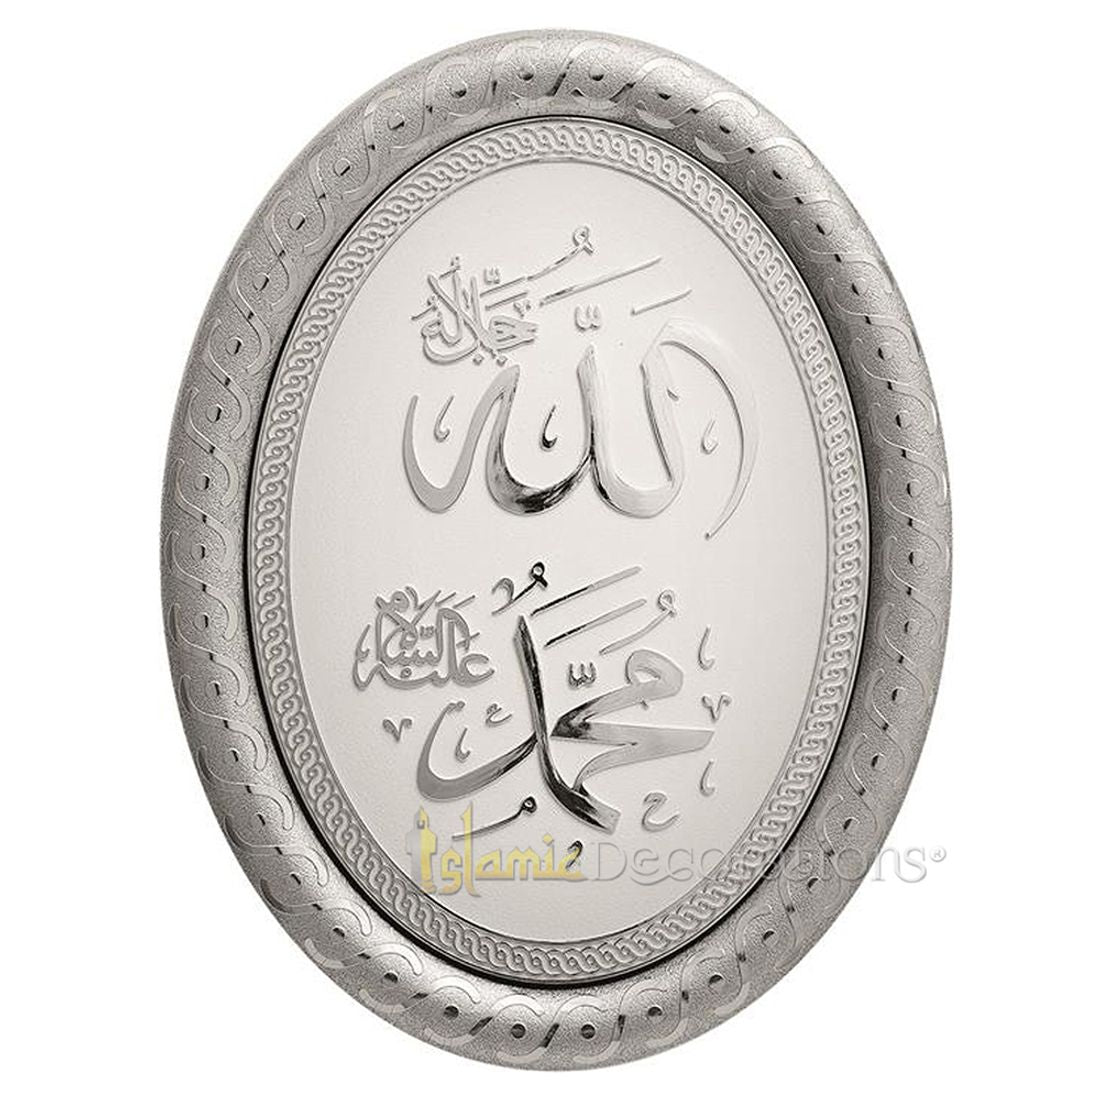 Allah Muhammad Silver & White Oval Molded 9 x 11-3/4 in Display Plaque – Islamic Calligraphy Art